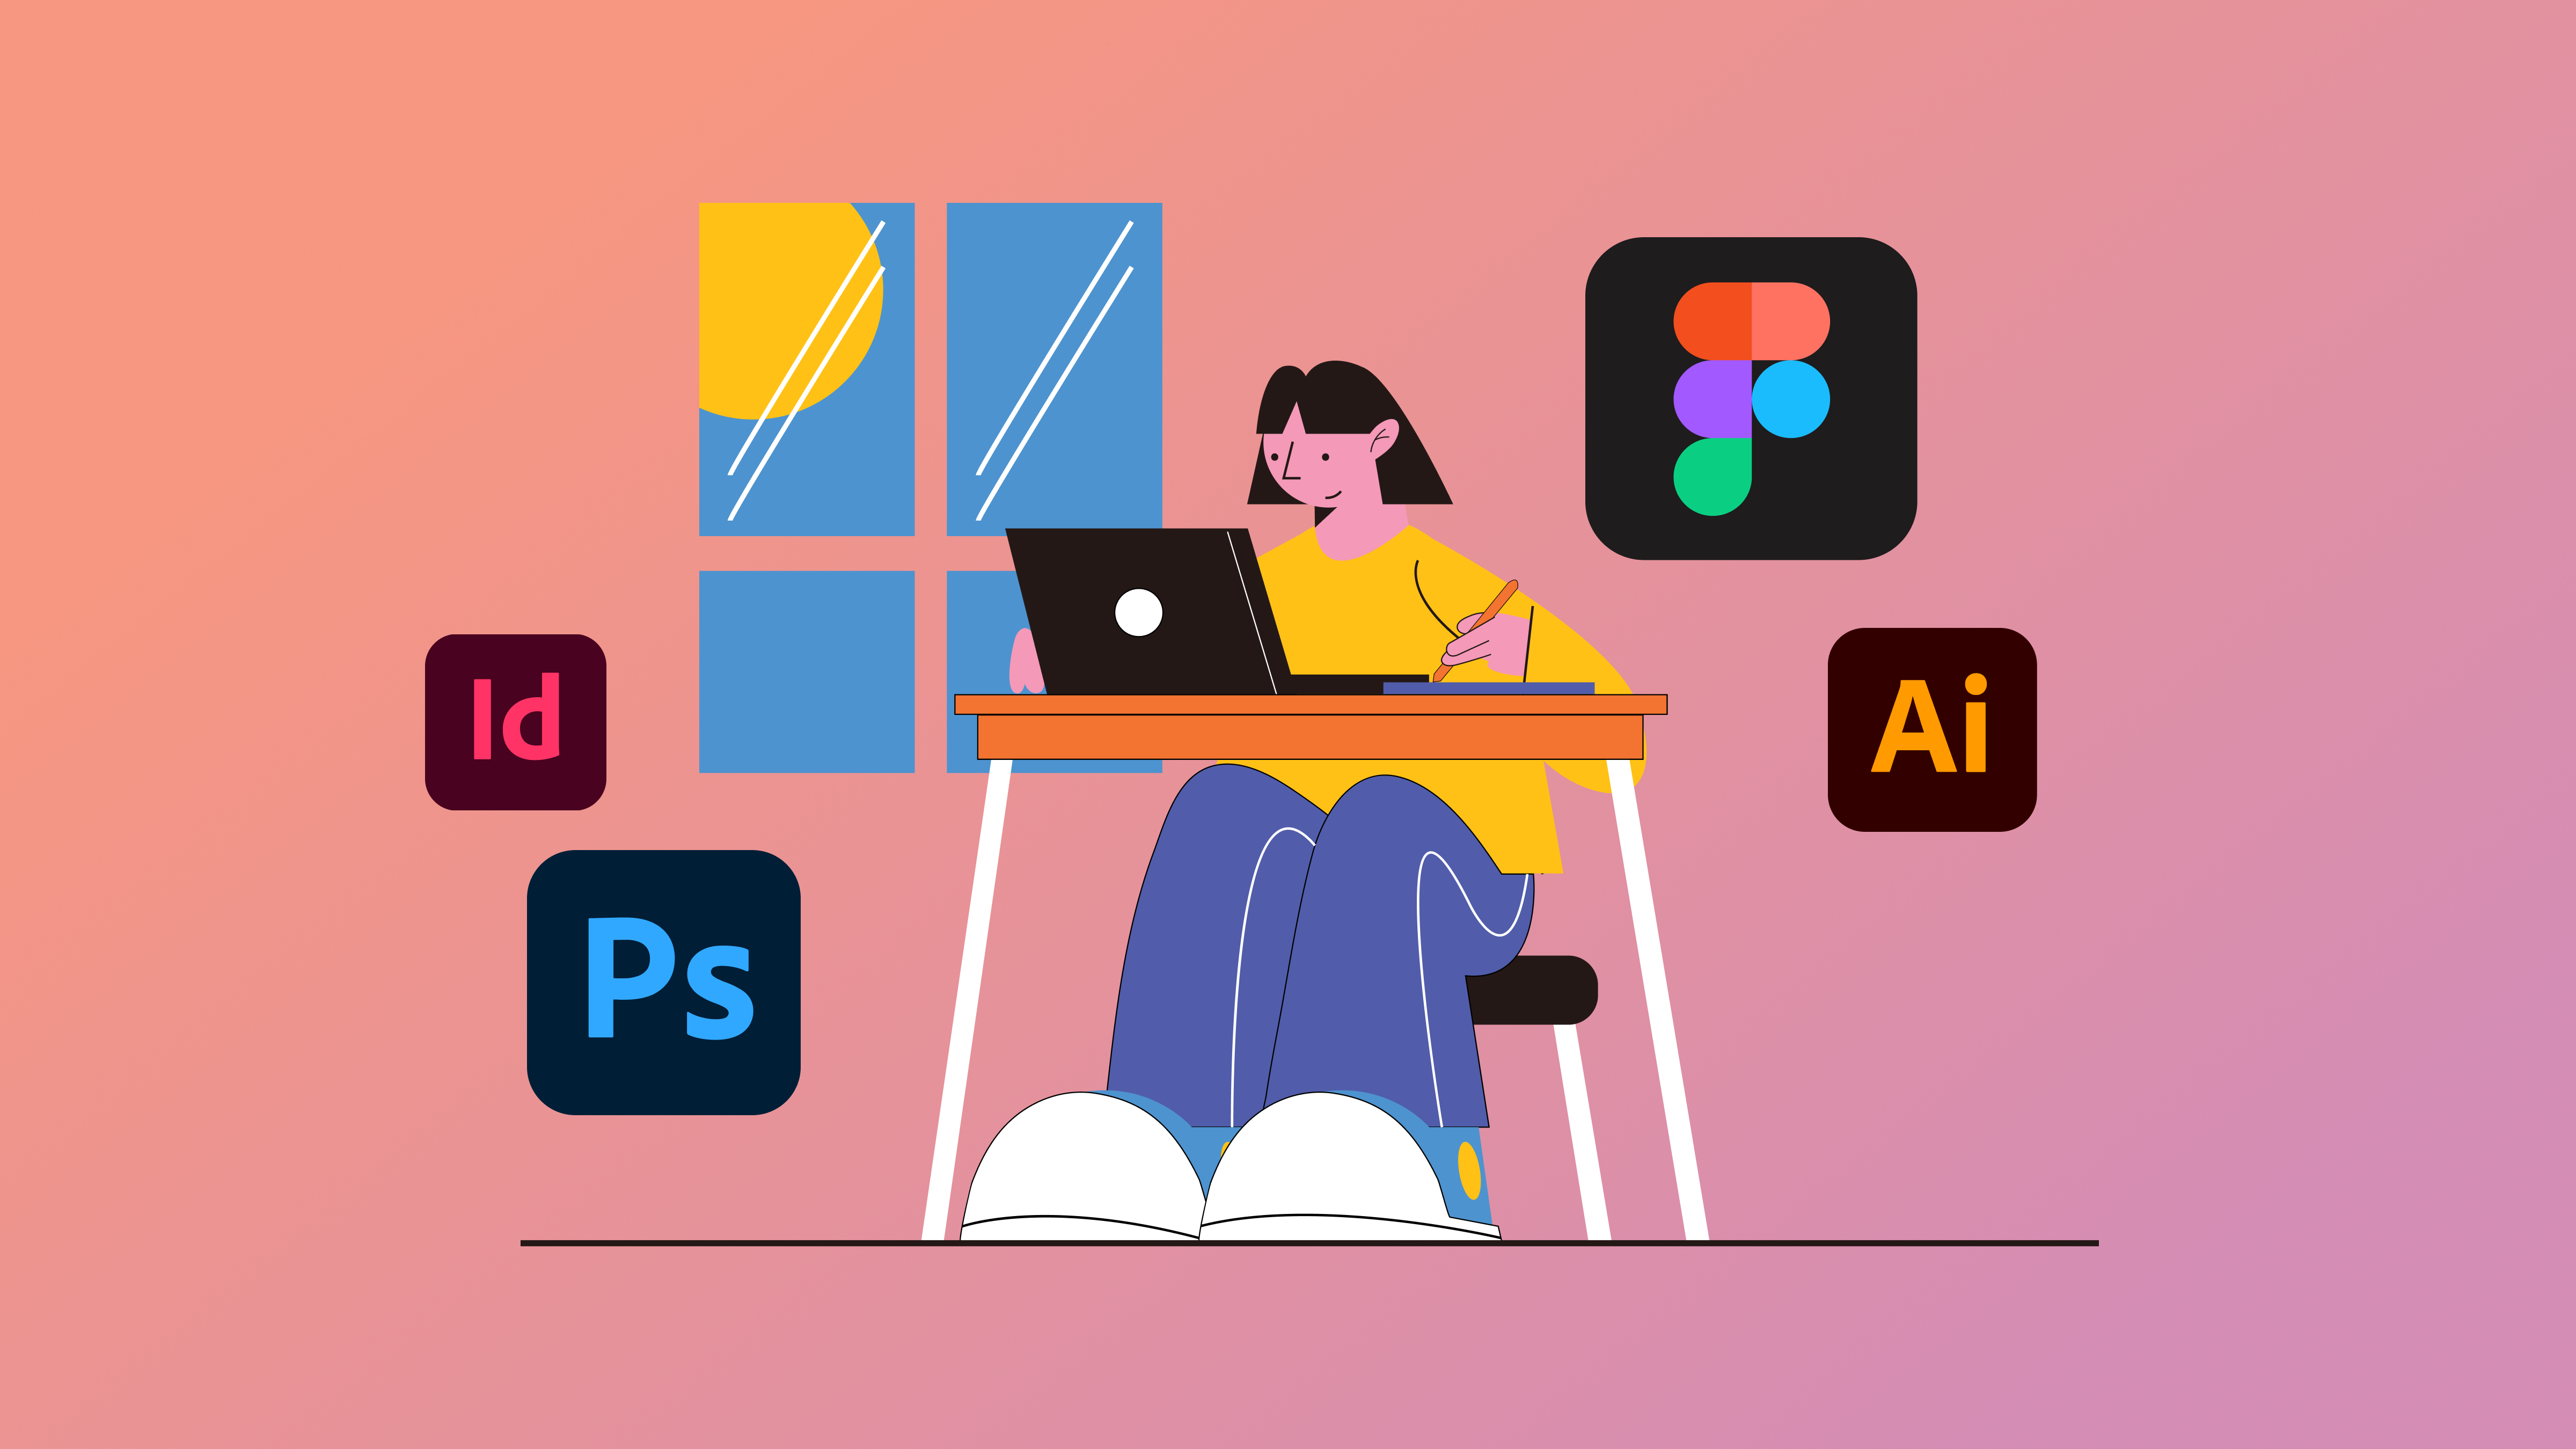 10 Best Graphic Design Tools & Software for Graphic Design: From Adobe Photoshop to Figma